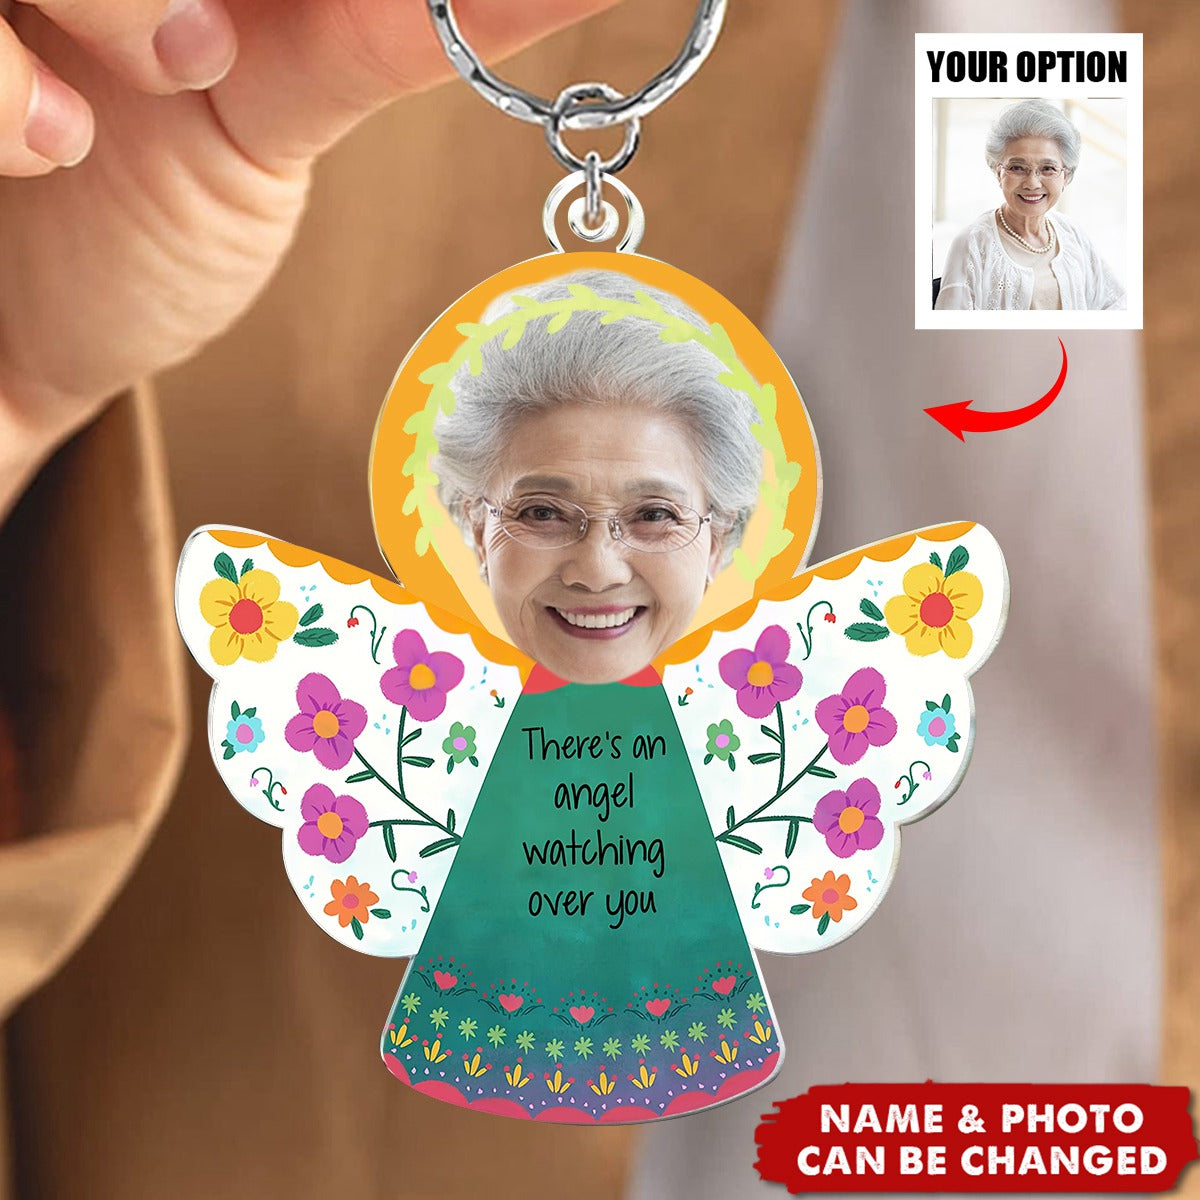 There's An Angel Watching Over You - Personalized Photo Keychian